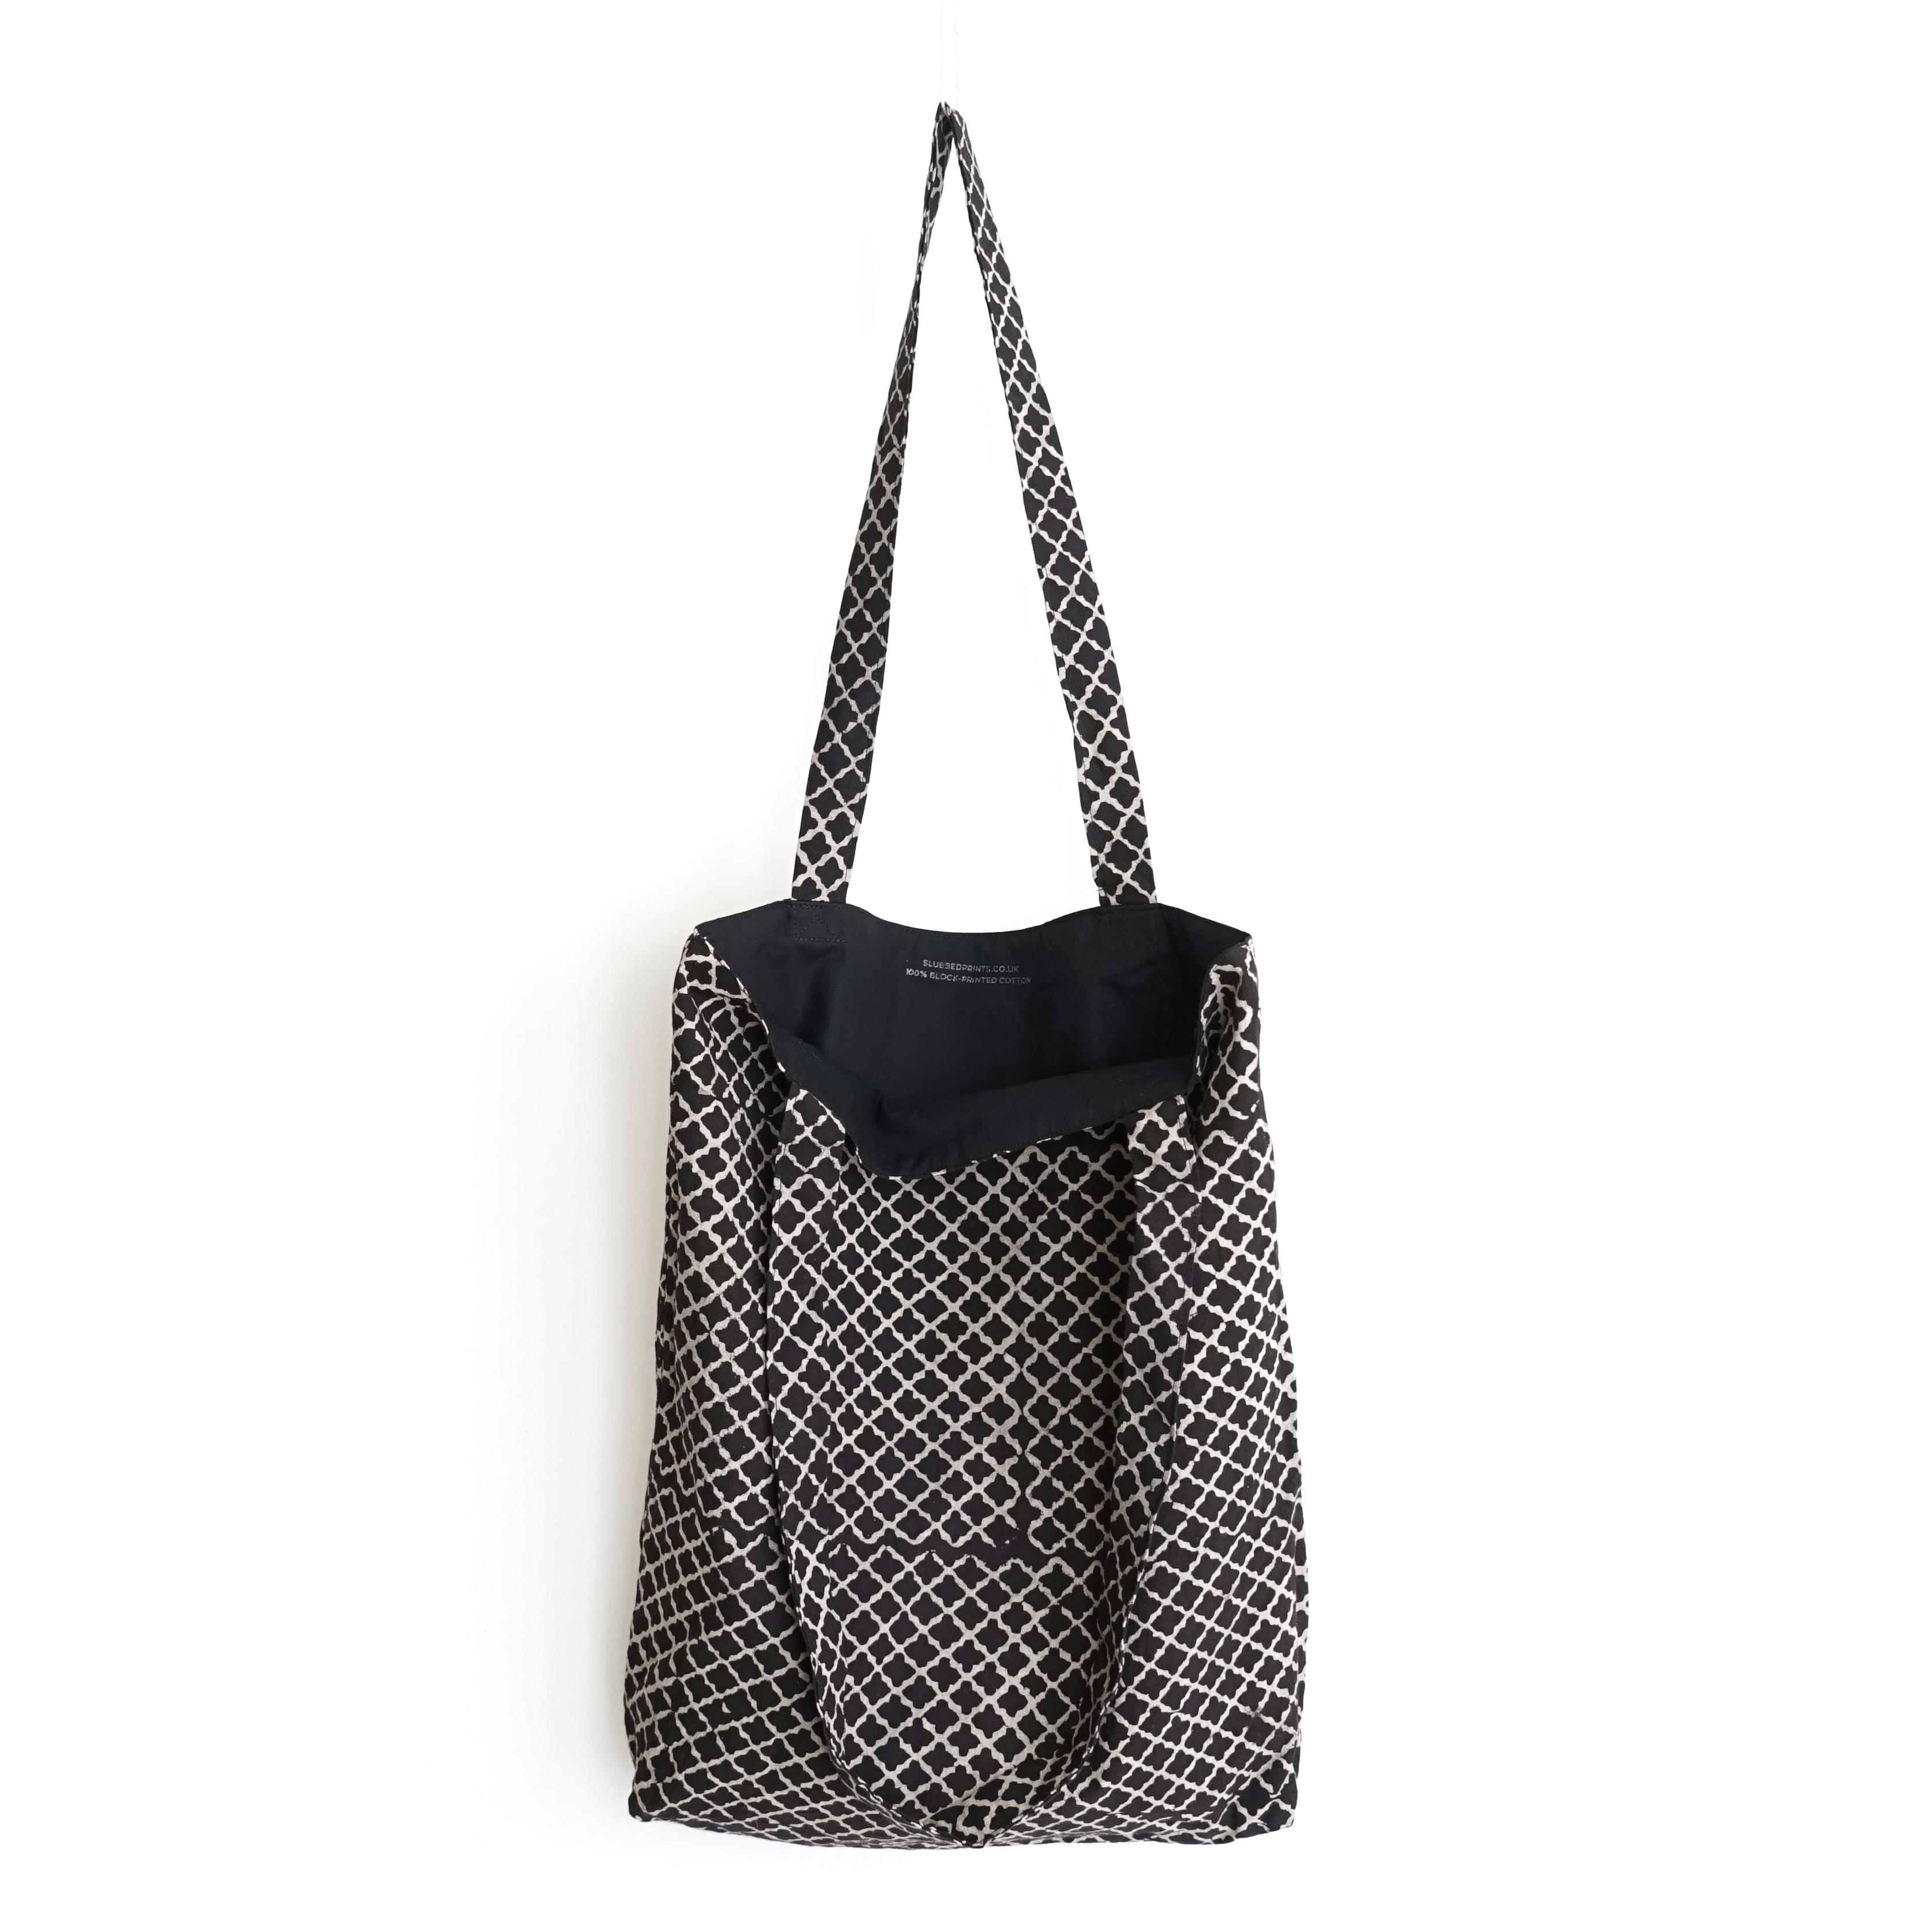 block printed cotton tote bag, natural dye, black, beige clover, lined with black cotton, open